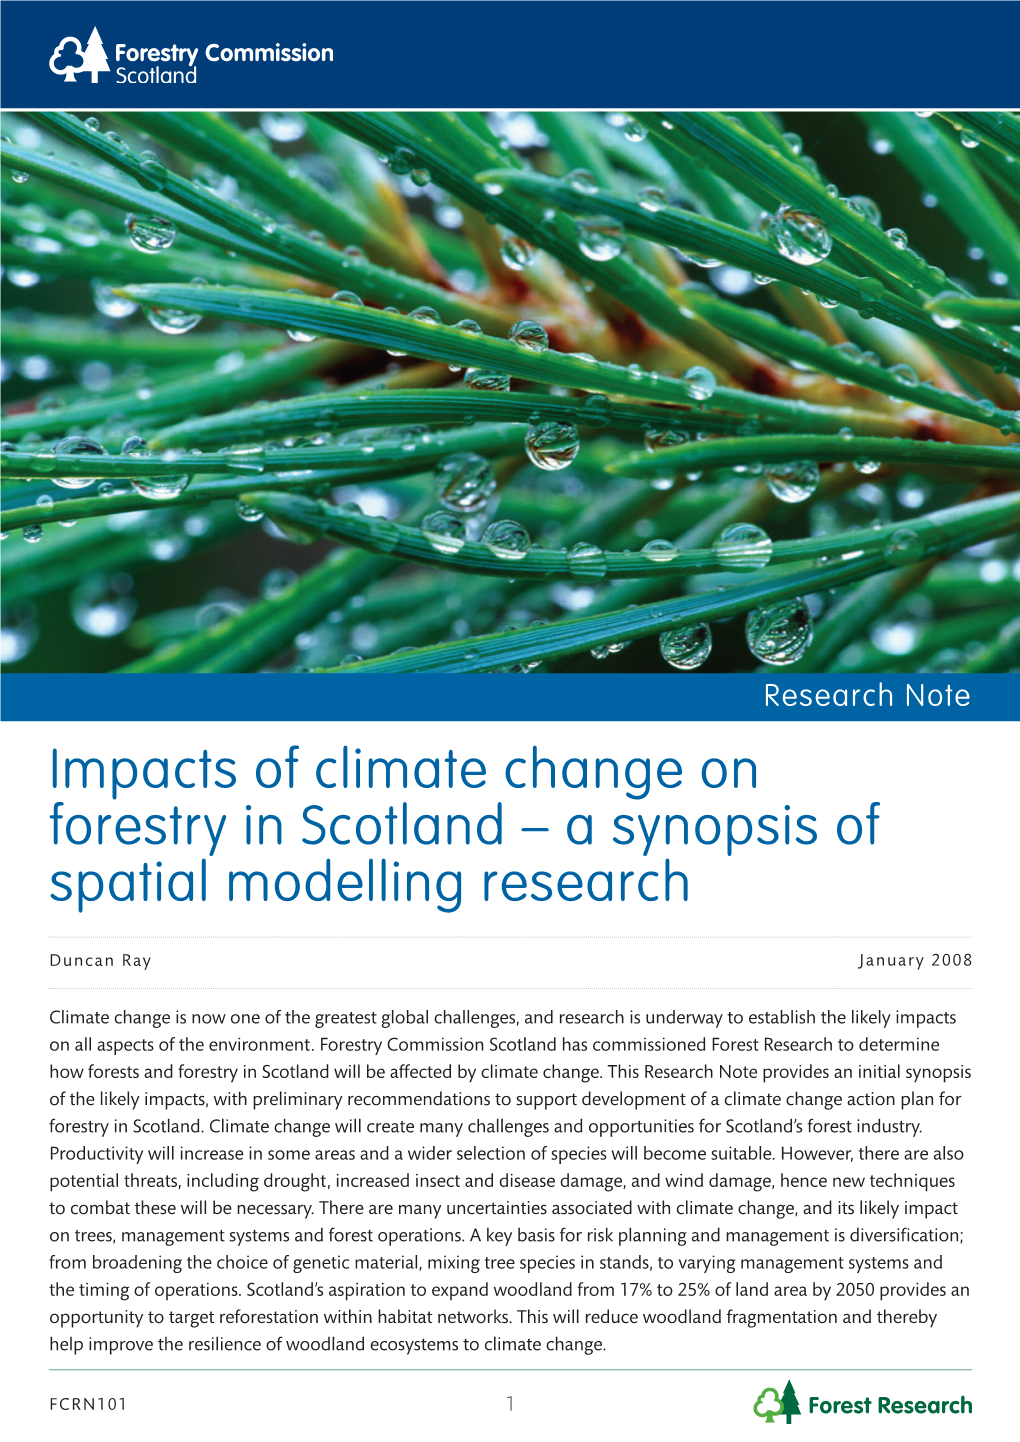 Impacts of Climate Change on Forestry in Scotland – a Synopsis of Spatial Modelling Research